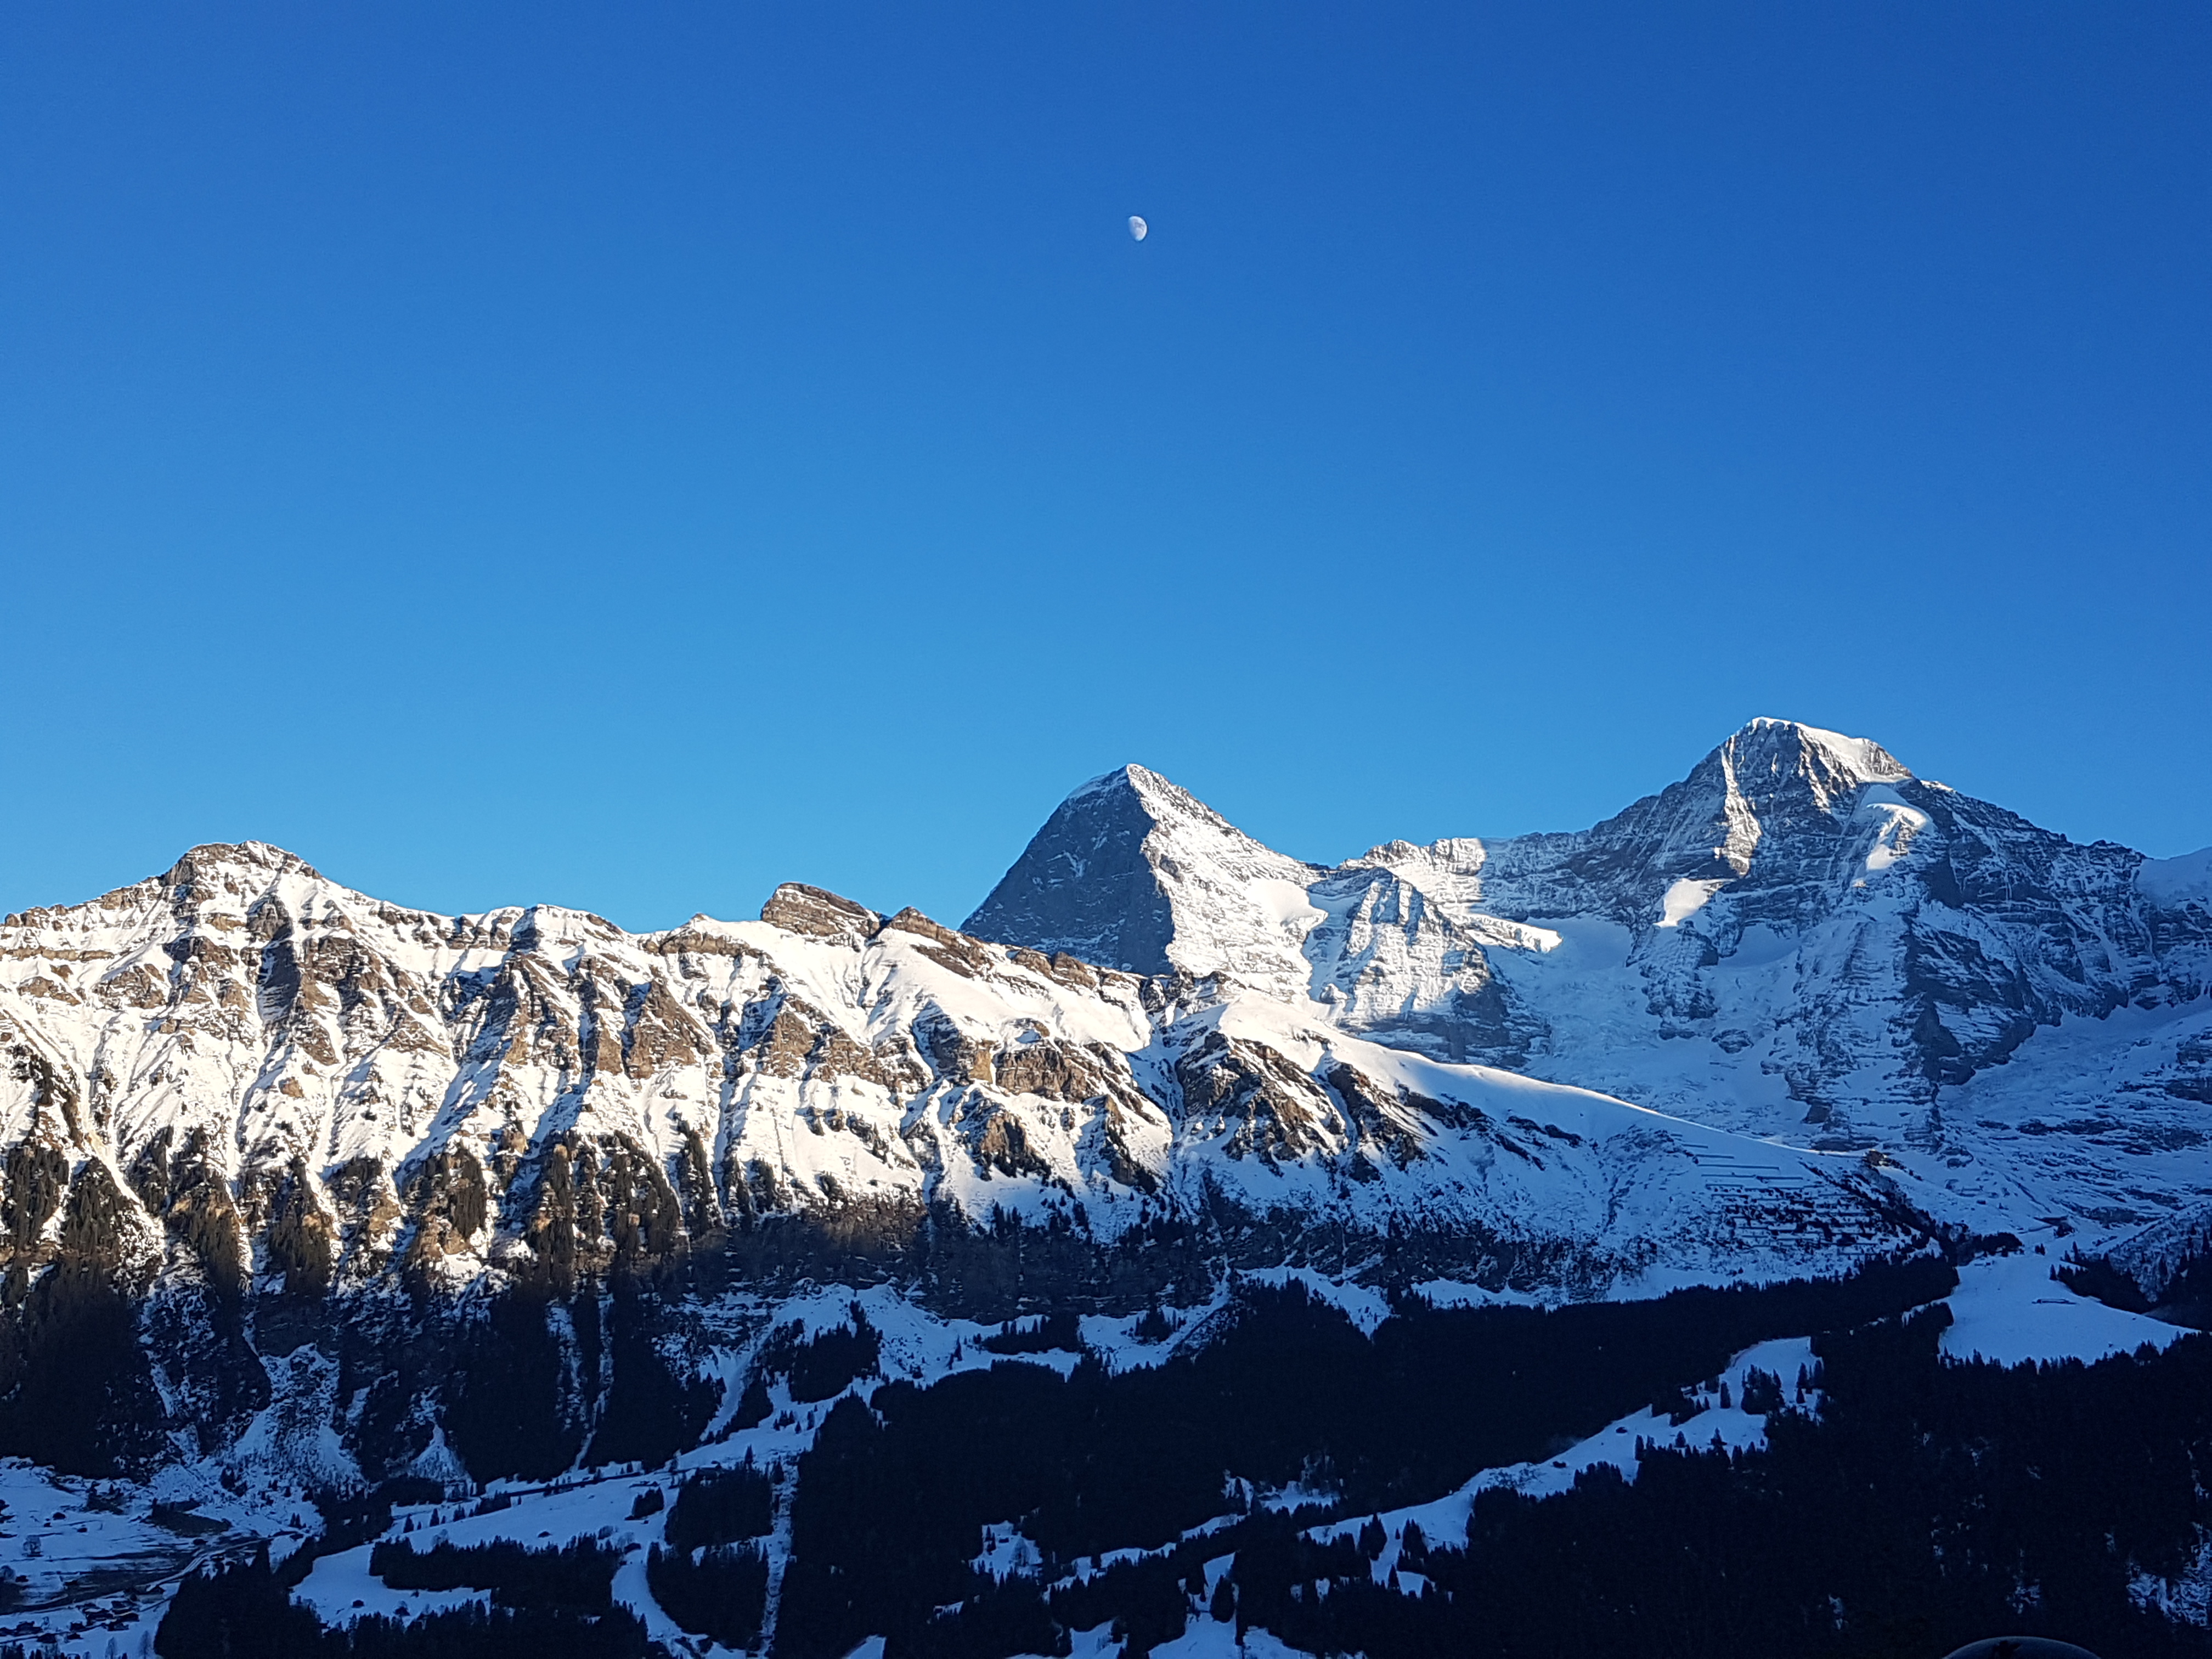 View of the Moon above the Eiger